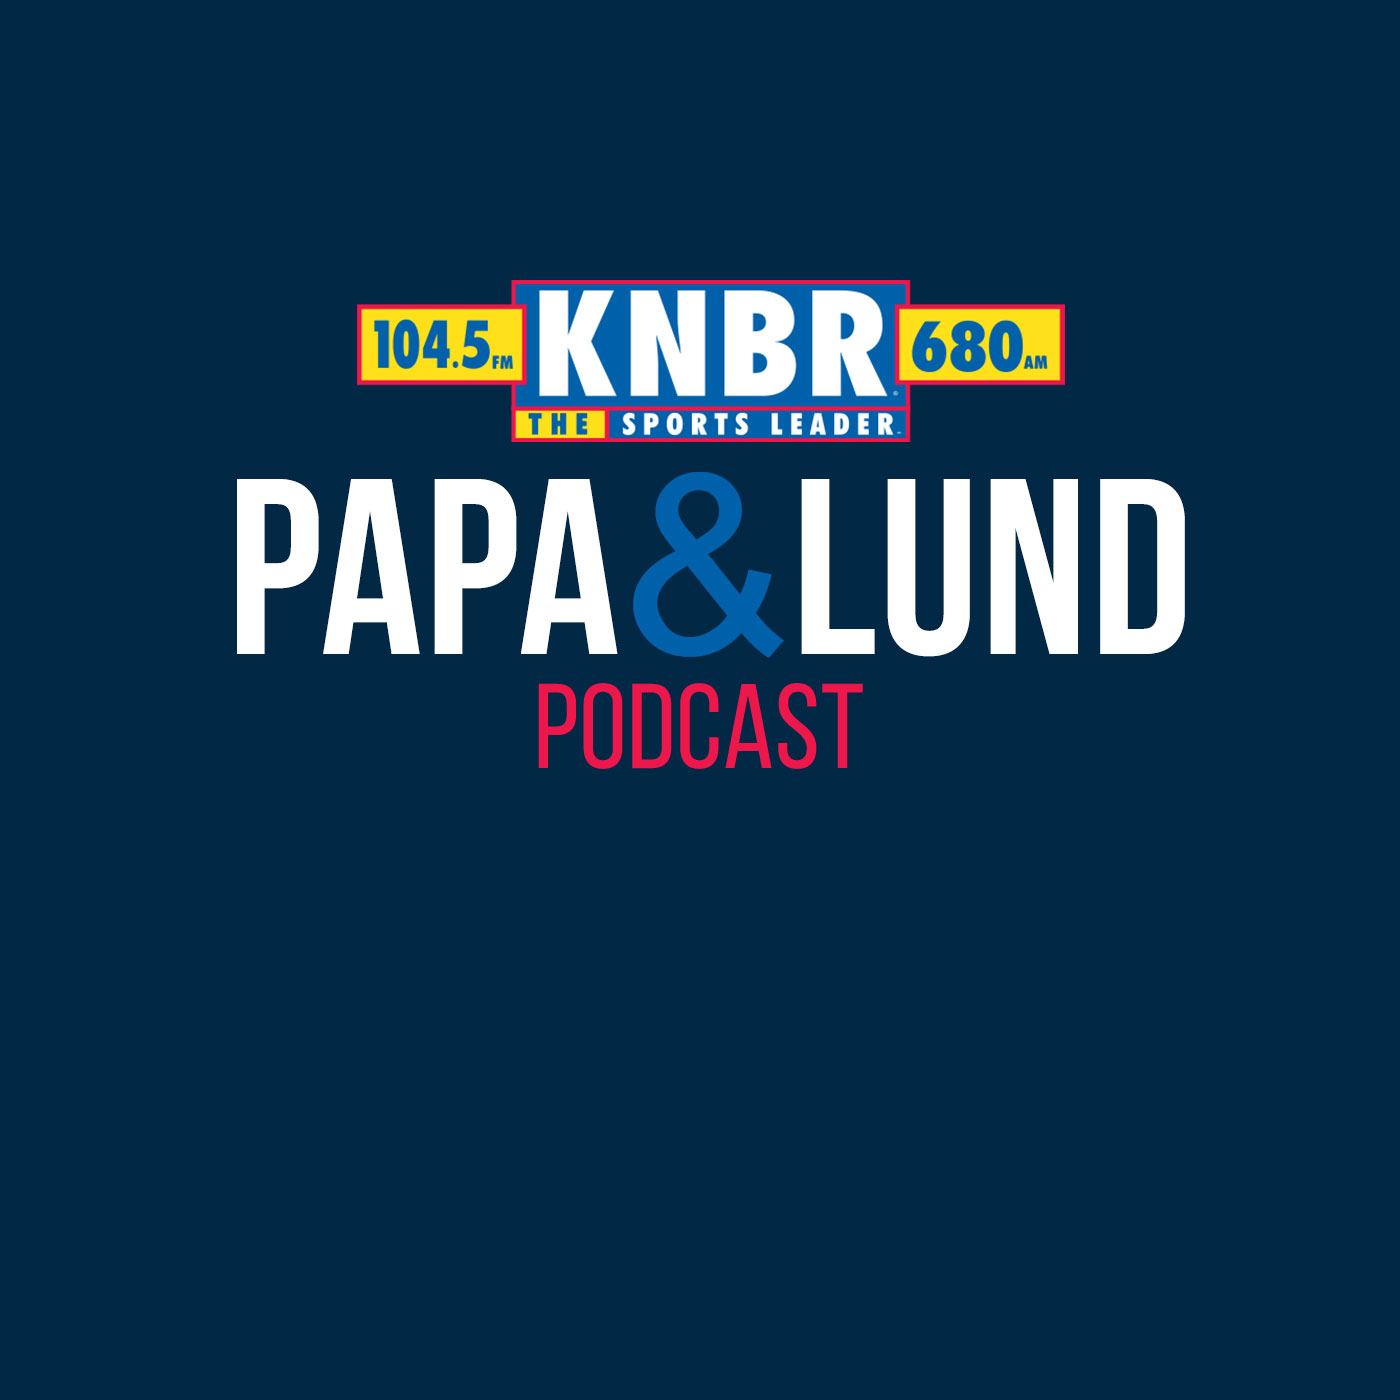 4-20 Kyle Draper joins Papa & Lund to discuss the hostile environment of the Chase Center crowd and how that could effect the Kings in their first road playoff game